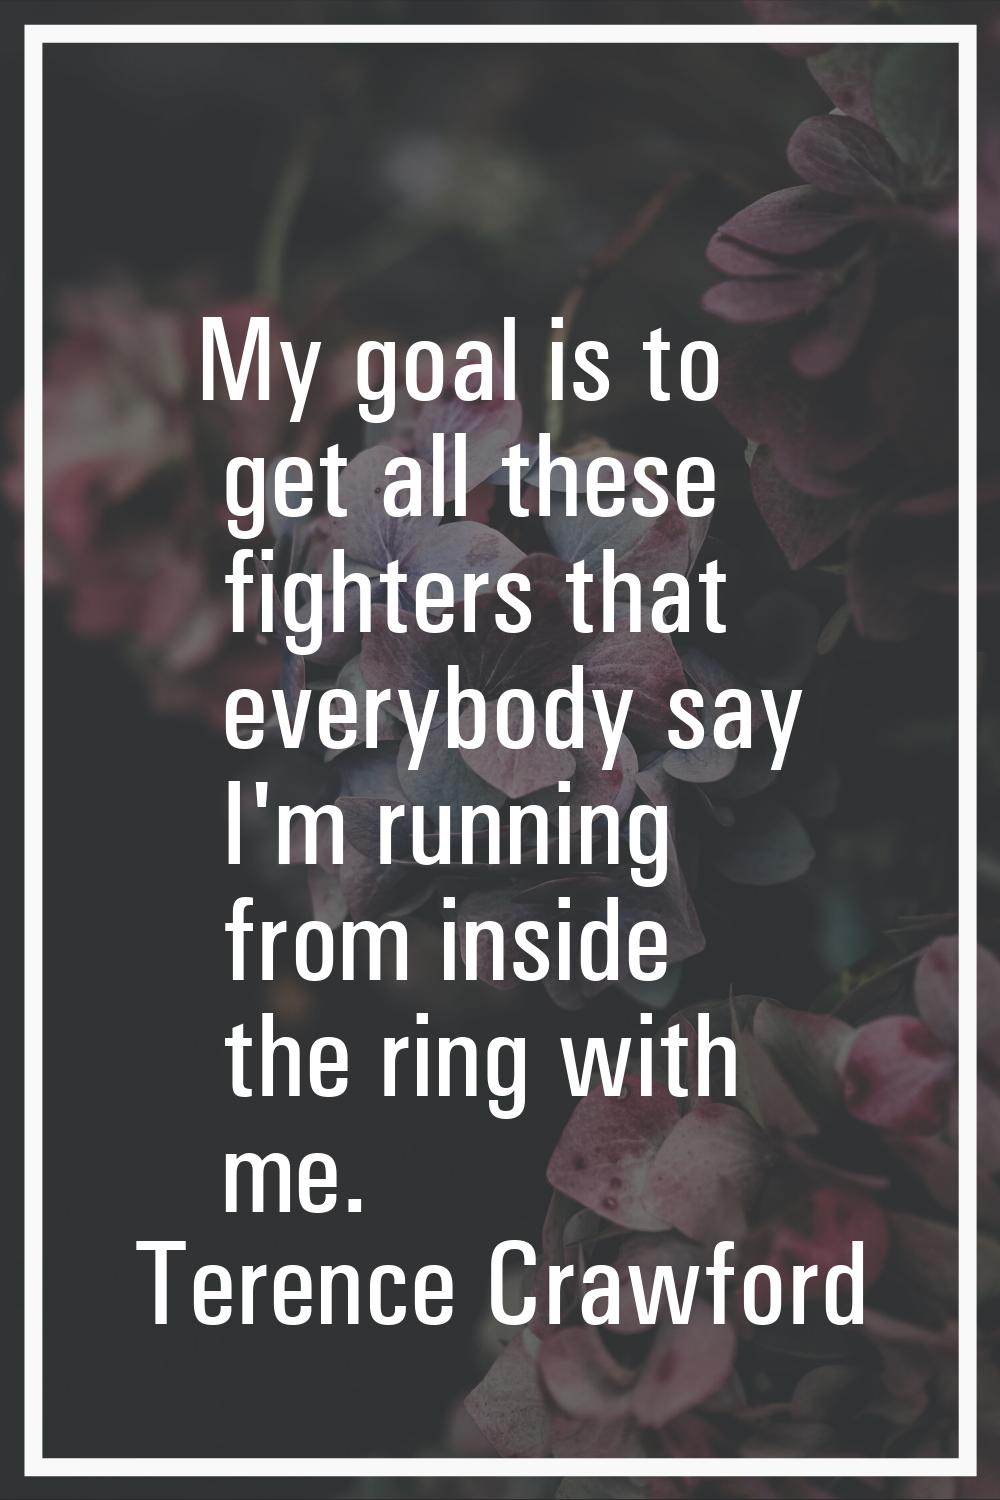 My goal is to get all these fighters that everybody say I'm running from inside the ring with me.